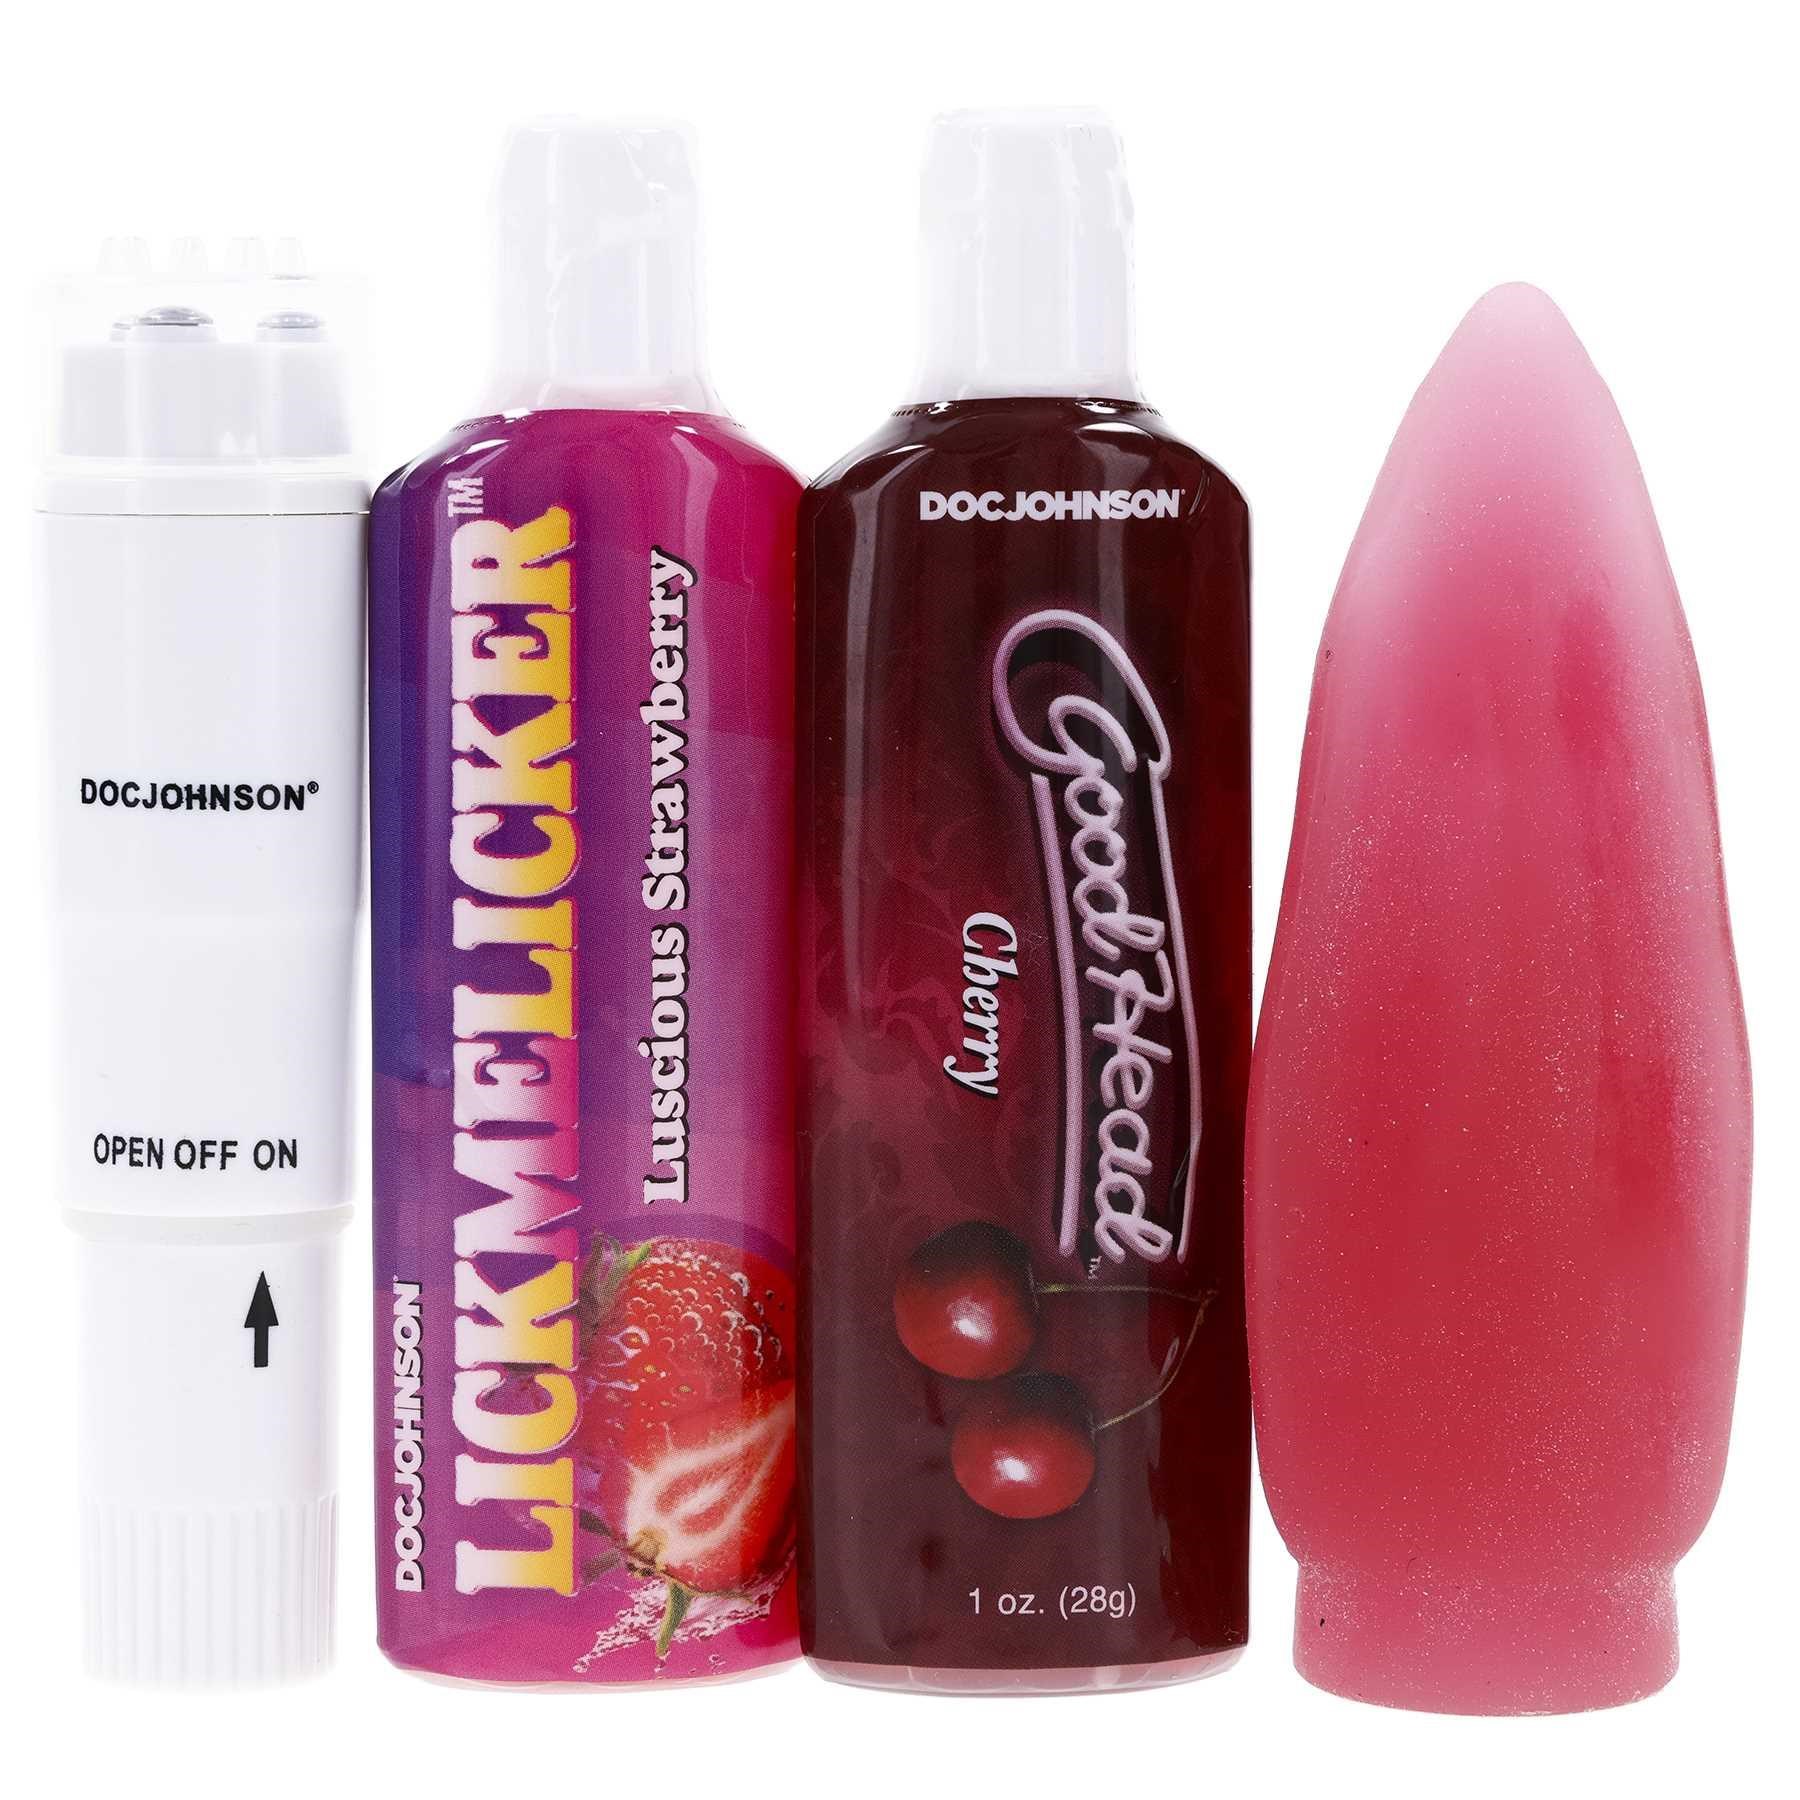 Oral Delight Couples Kit with tongue attachment on rocket vibe